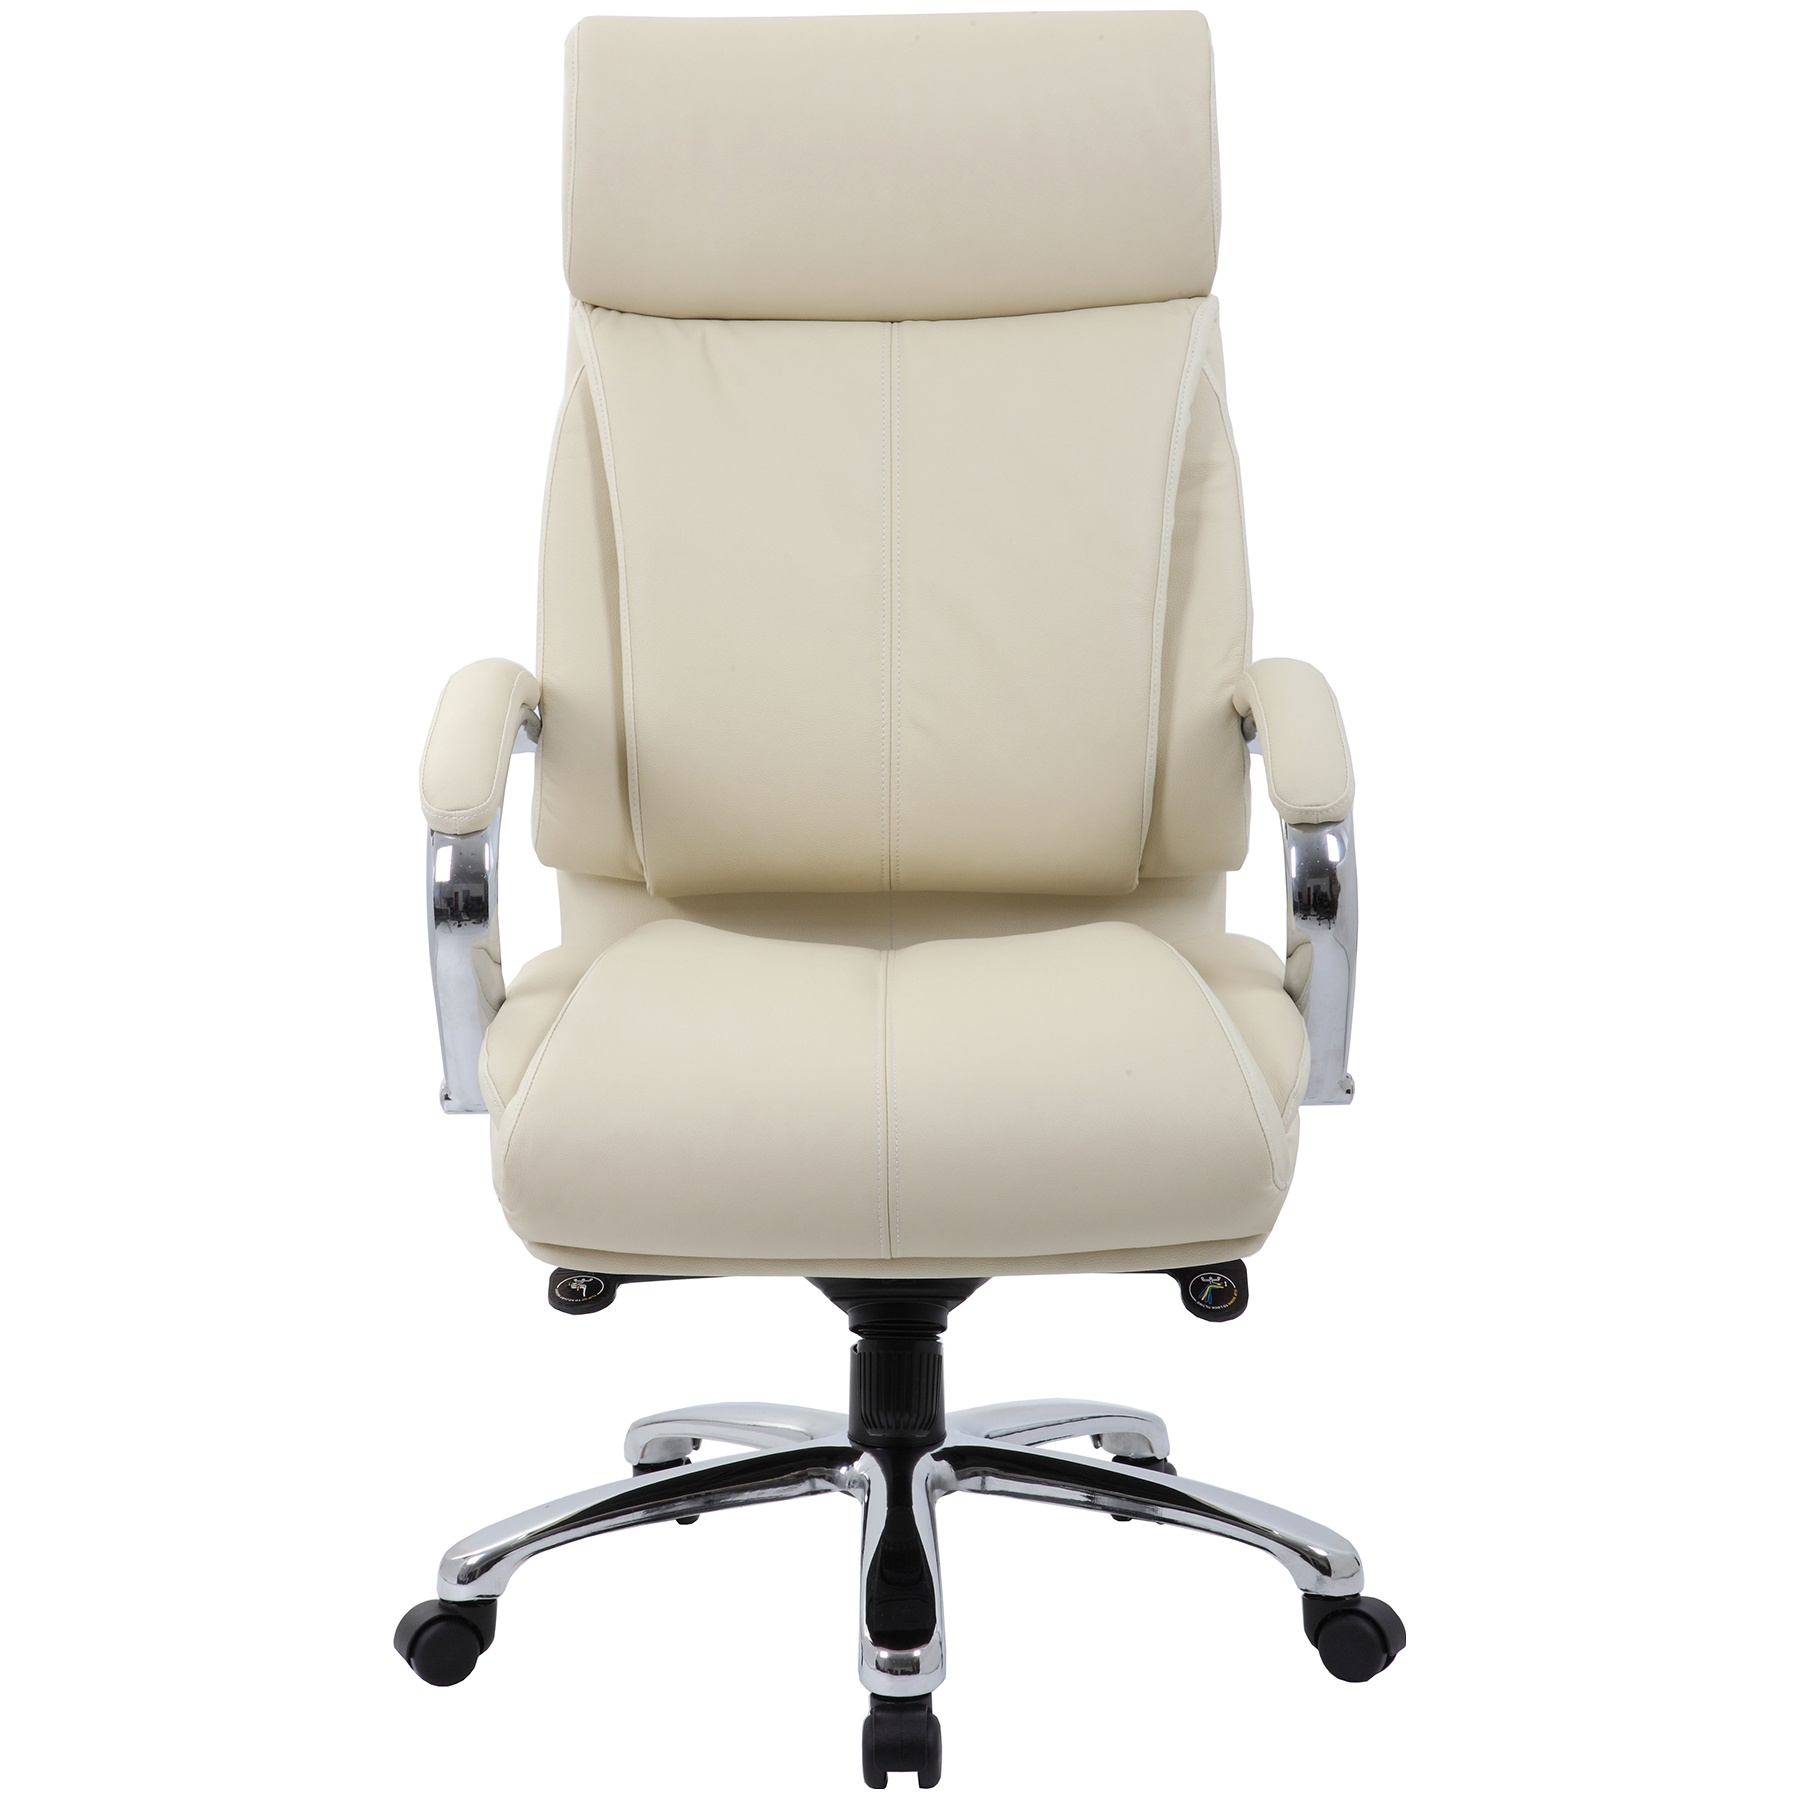 Savona Top Leather Executive Office Chair Cream | Executive Office Chairs